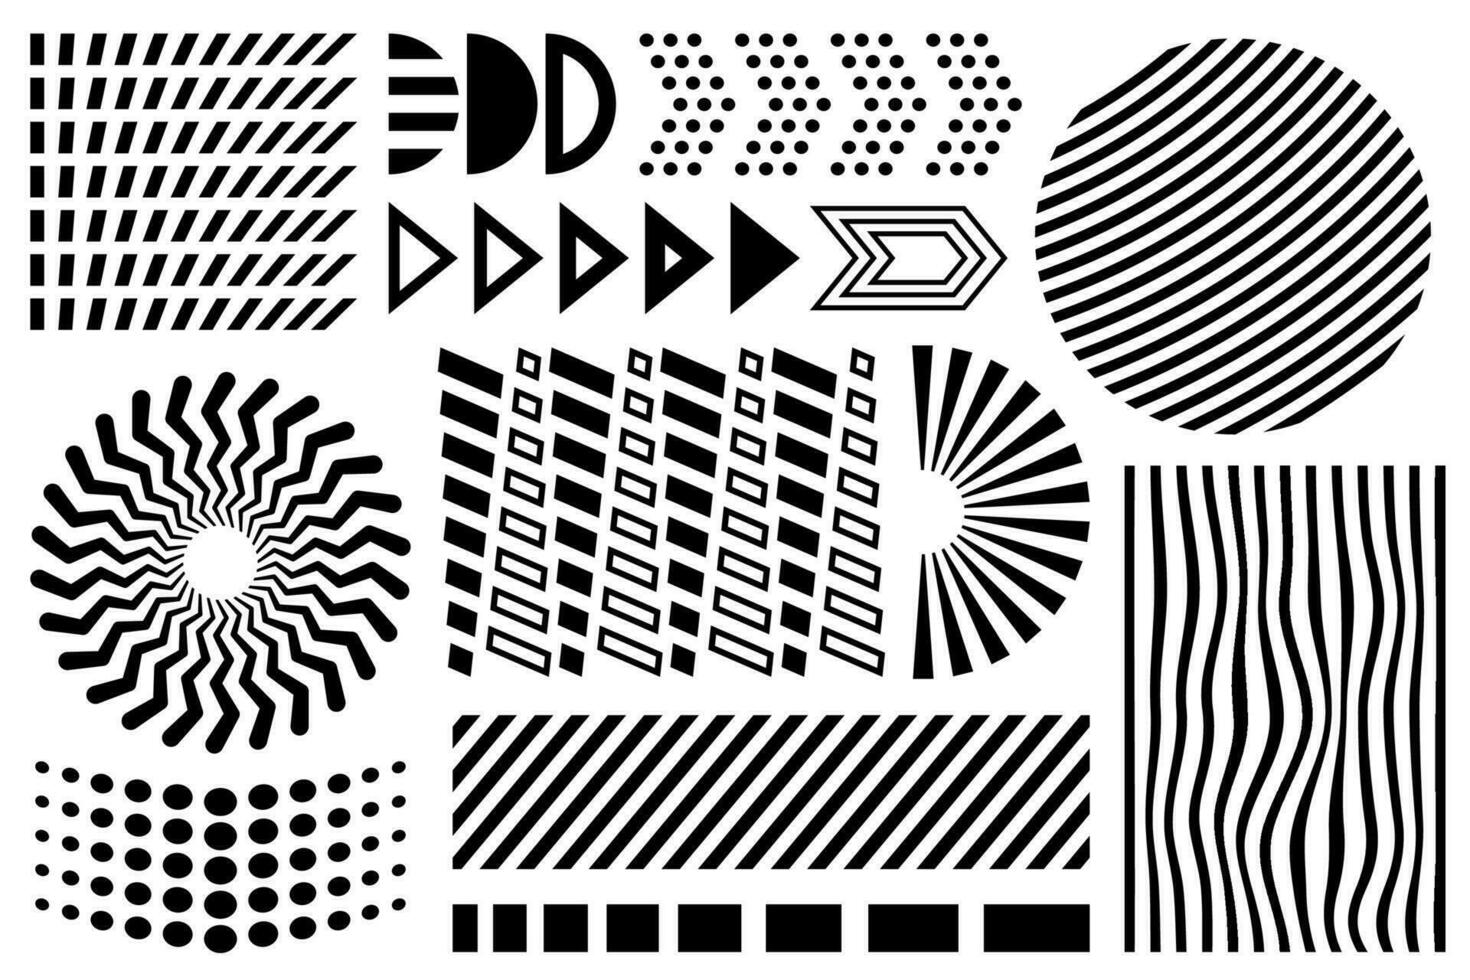 Black and white geometric textures and design elements. Memphis set 90's abstract minimalistic geometric shapes, forms and textures. vector